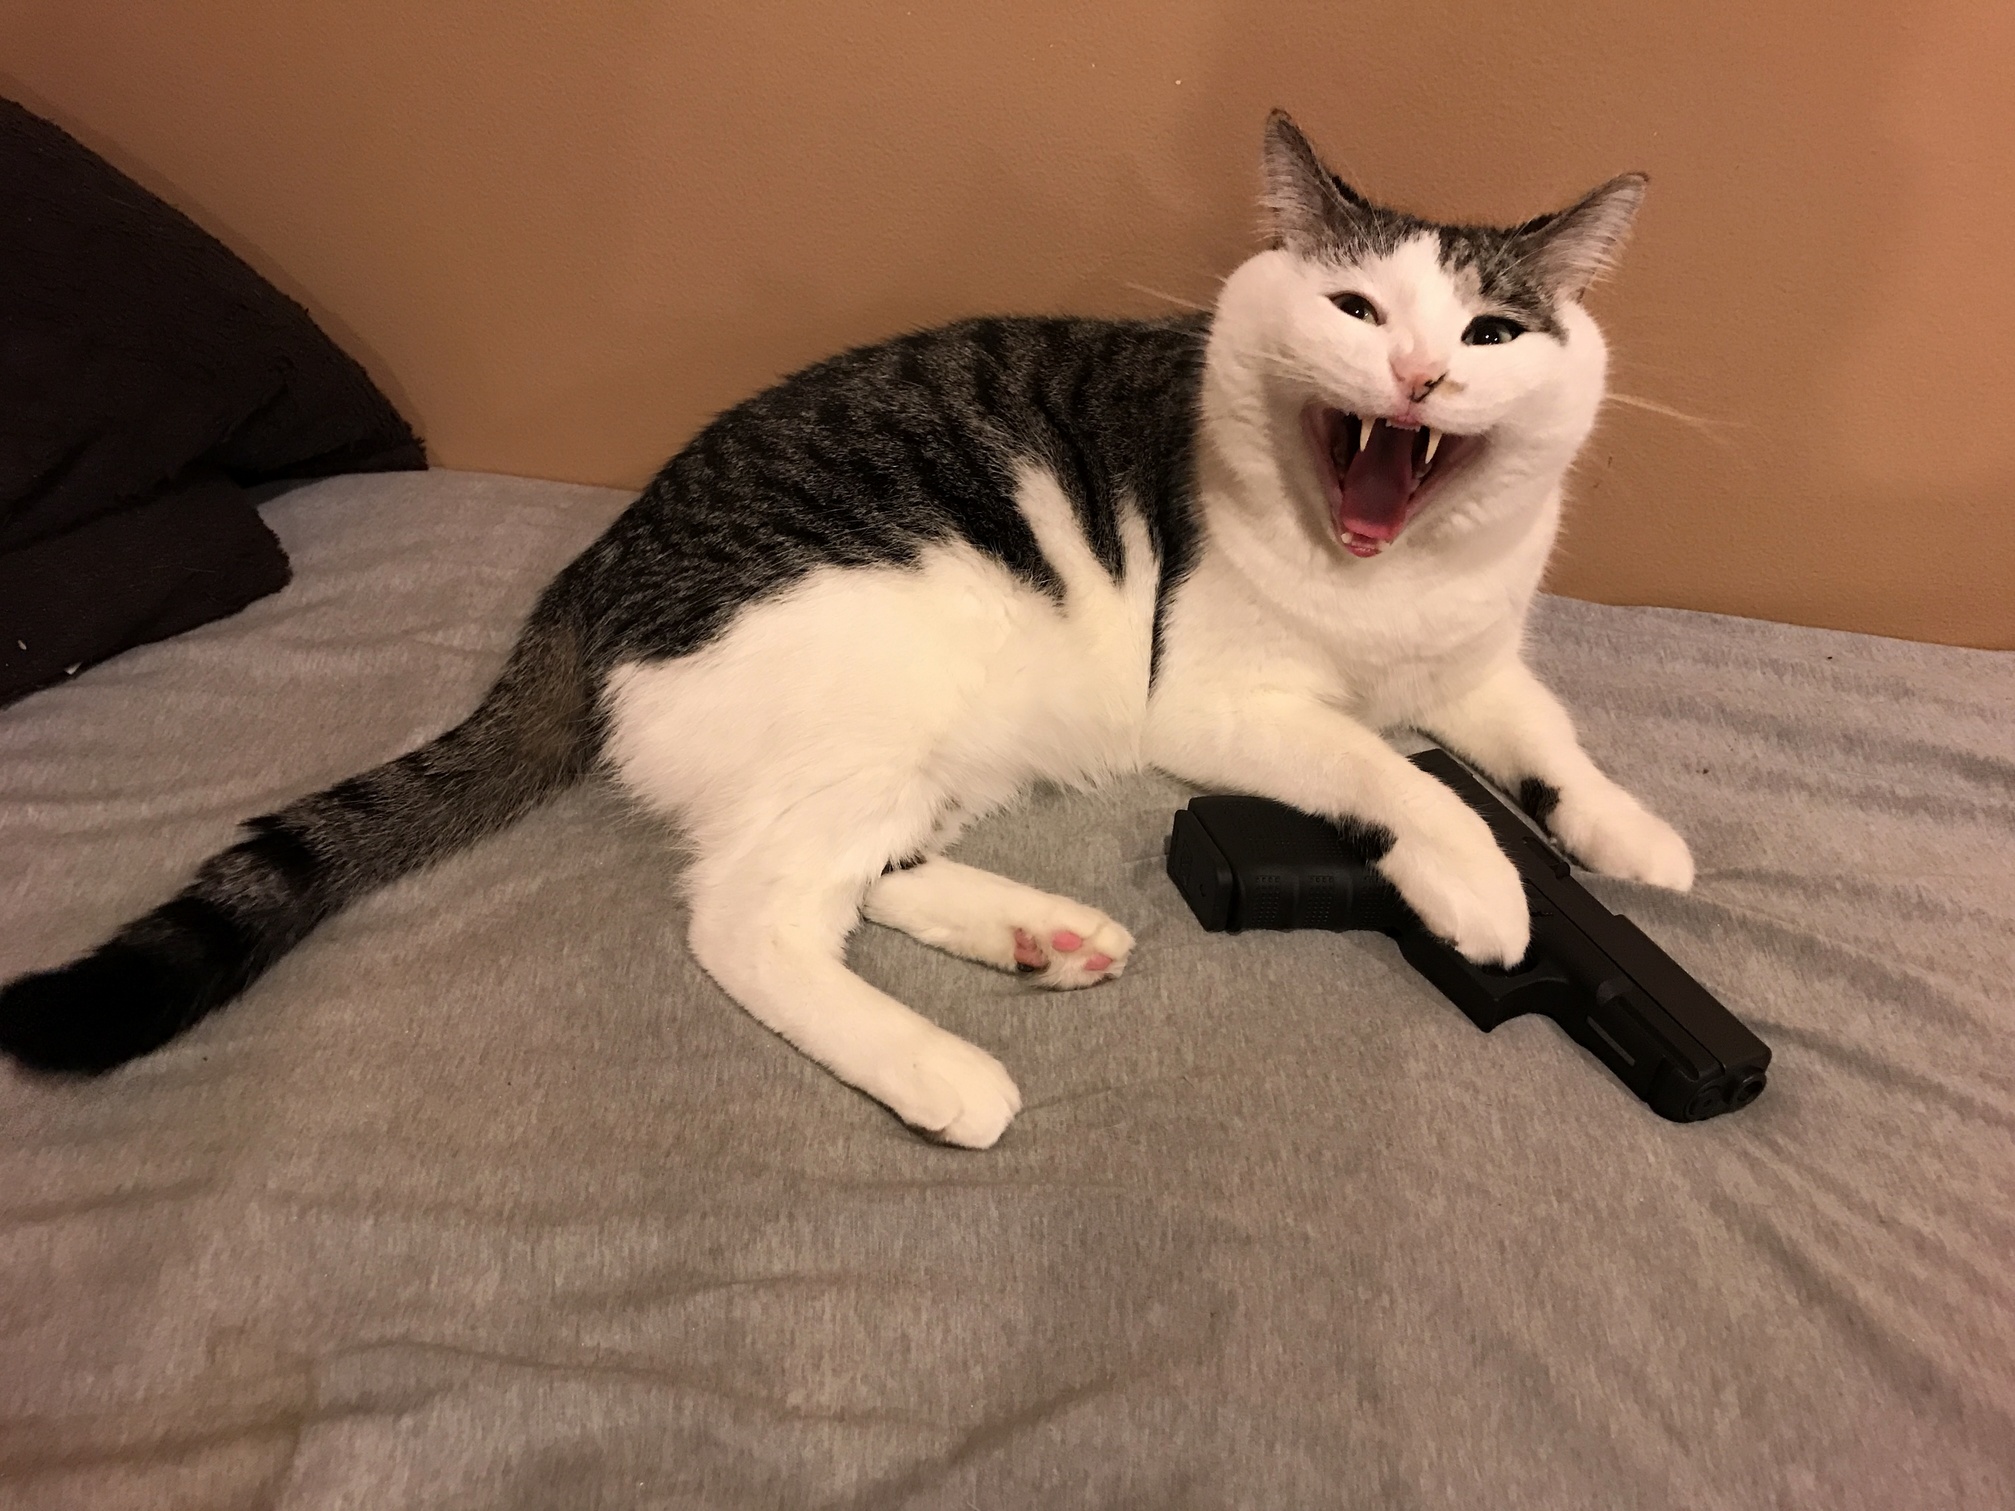 I told him cats cant own guns and he was not happy